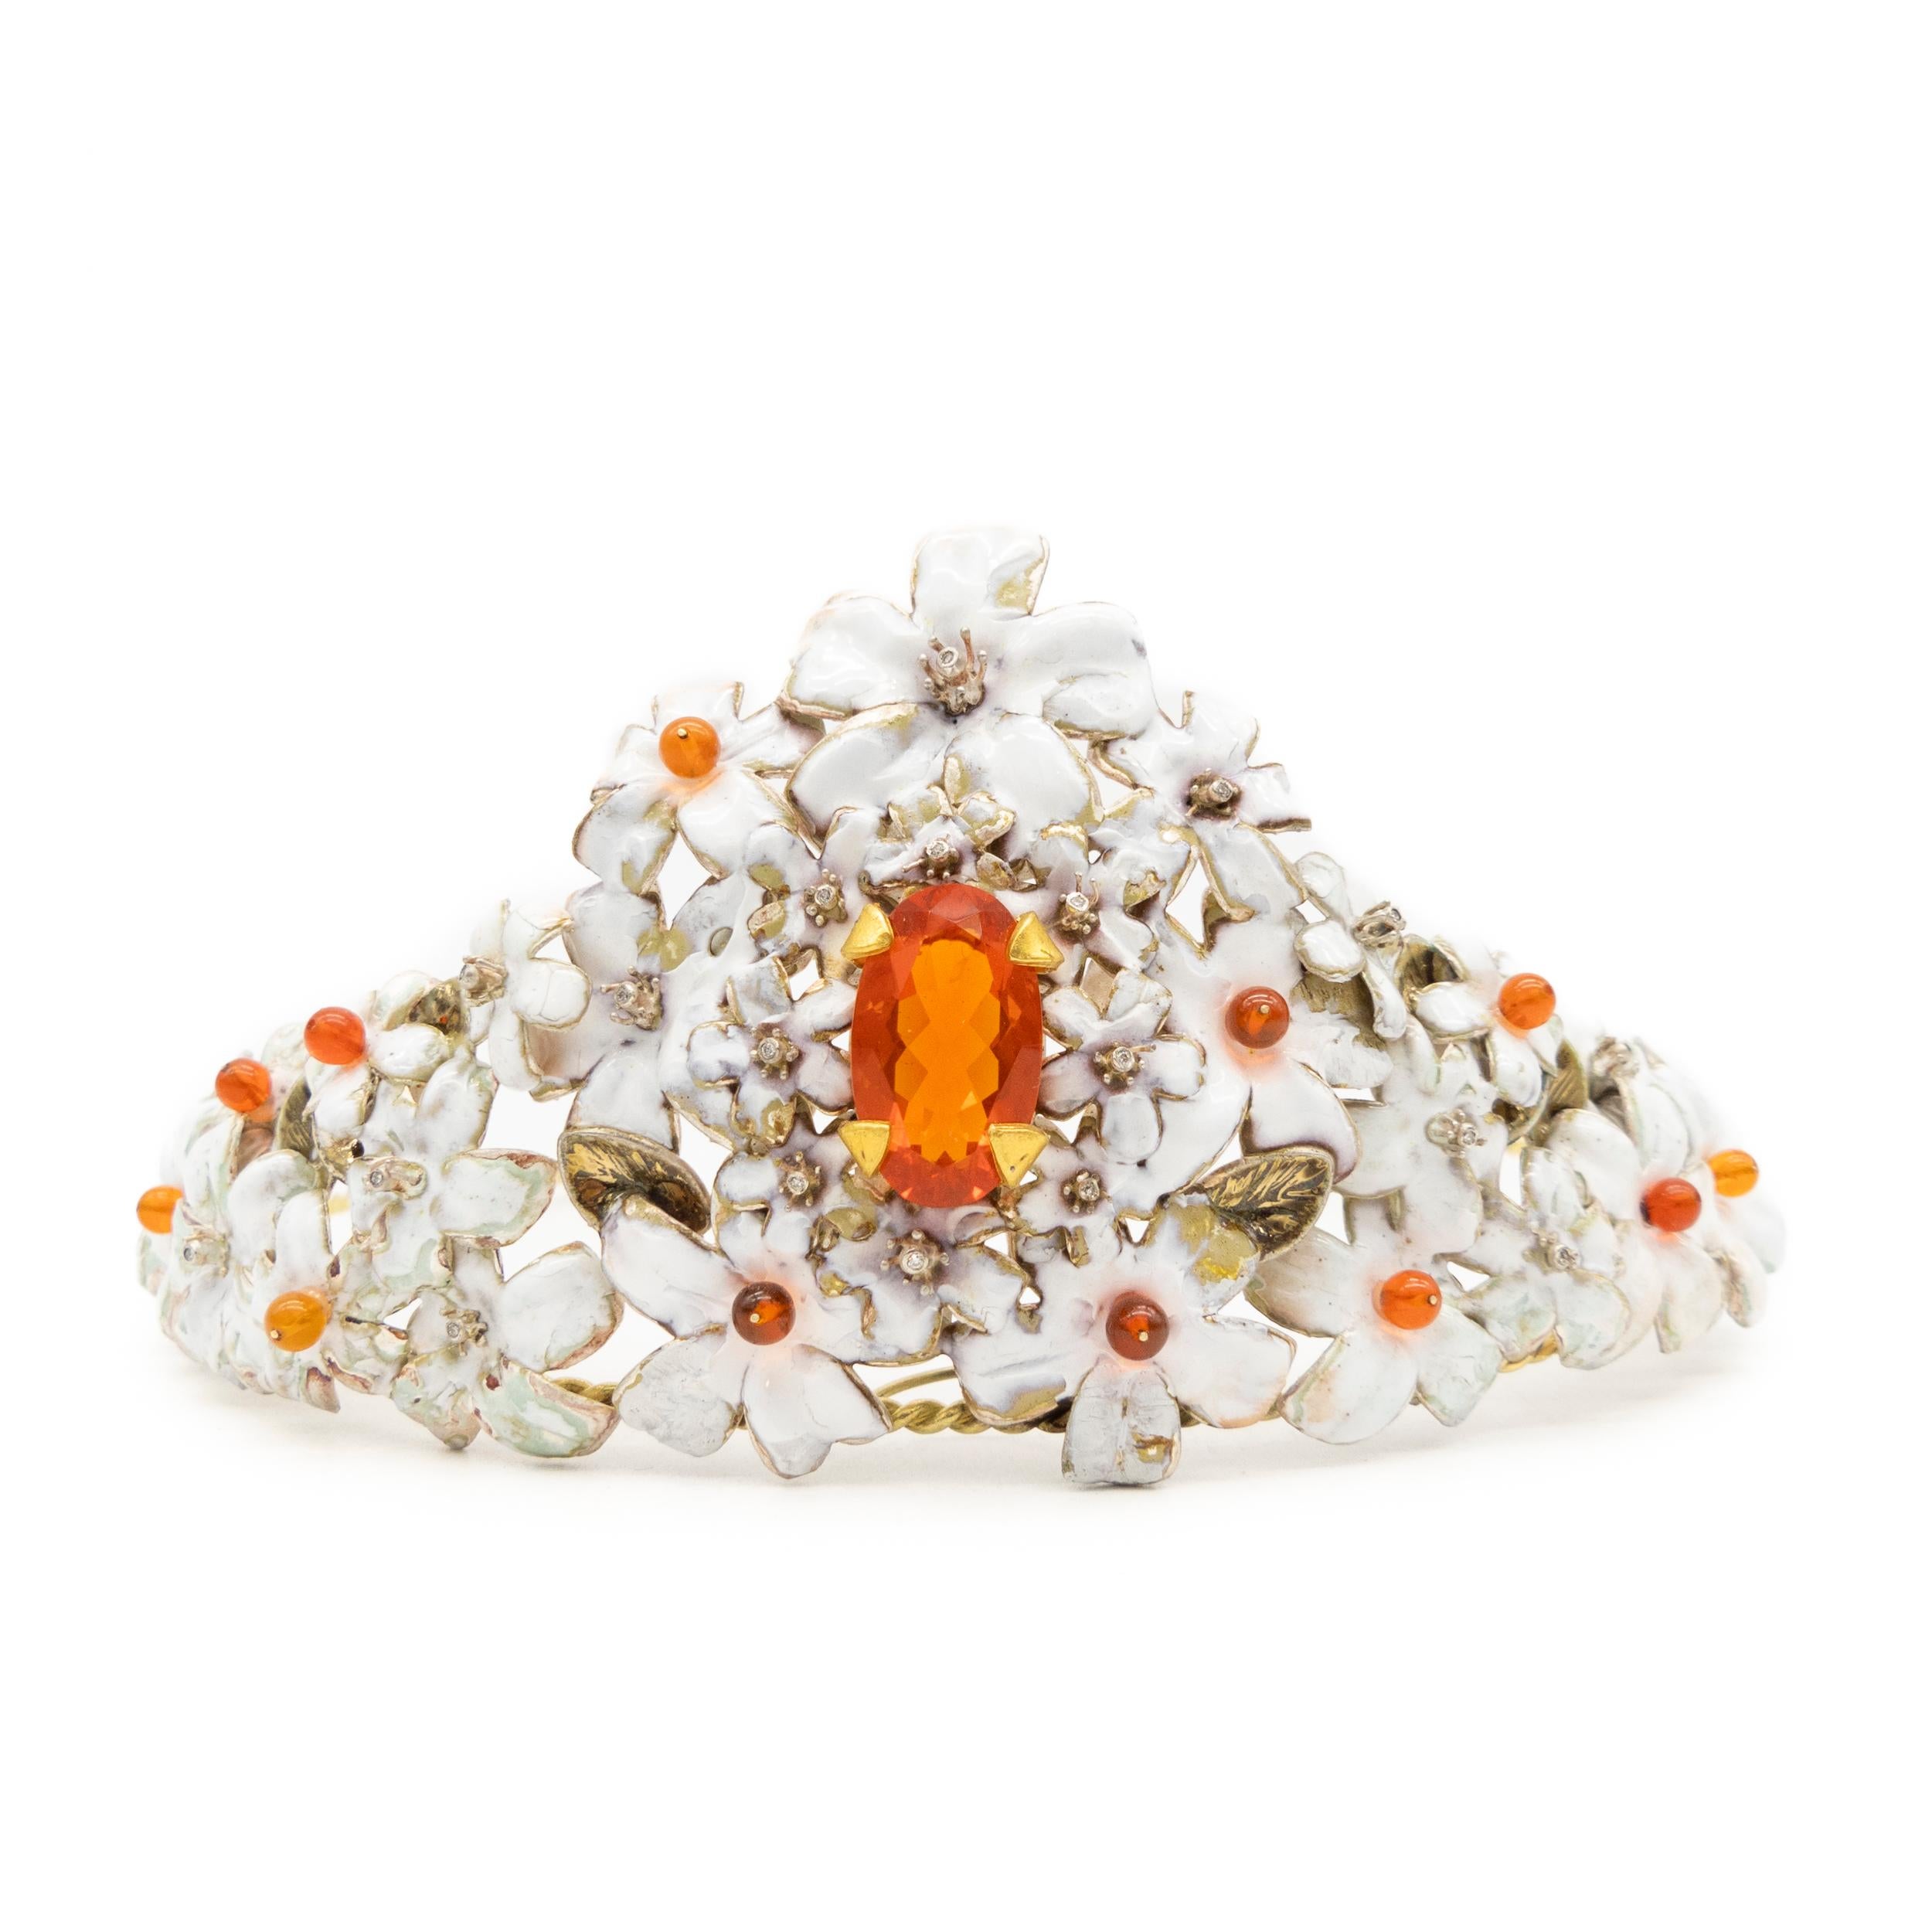 21st Century Tiara Silver White Enameled Oval Central Fire Opal 18 Karat Gold

Tiara made in Silver enameled in white, 18 Karat gold, 12 spheres in fire opals of 4 mm, a central oval fire opal of 9.07 carats and diamonds

Tiara from the Valencia